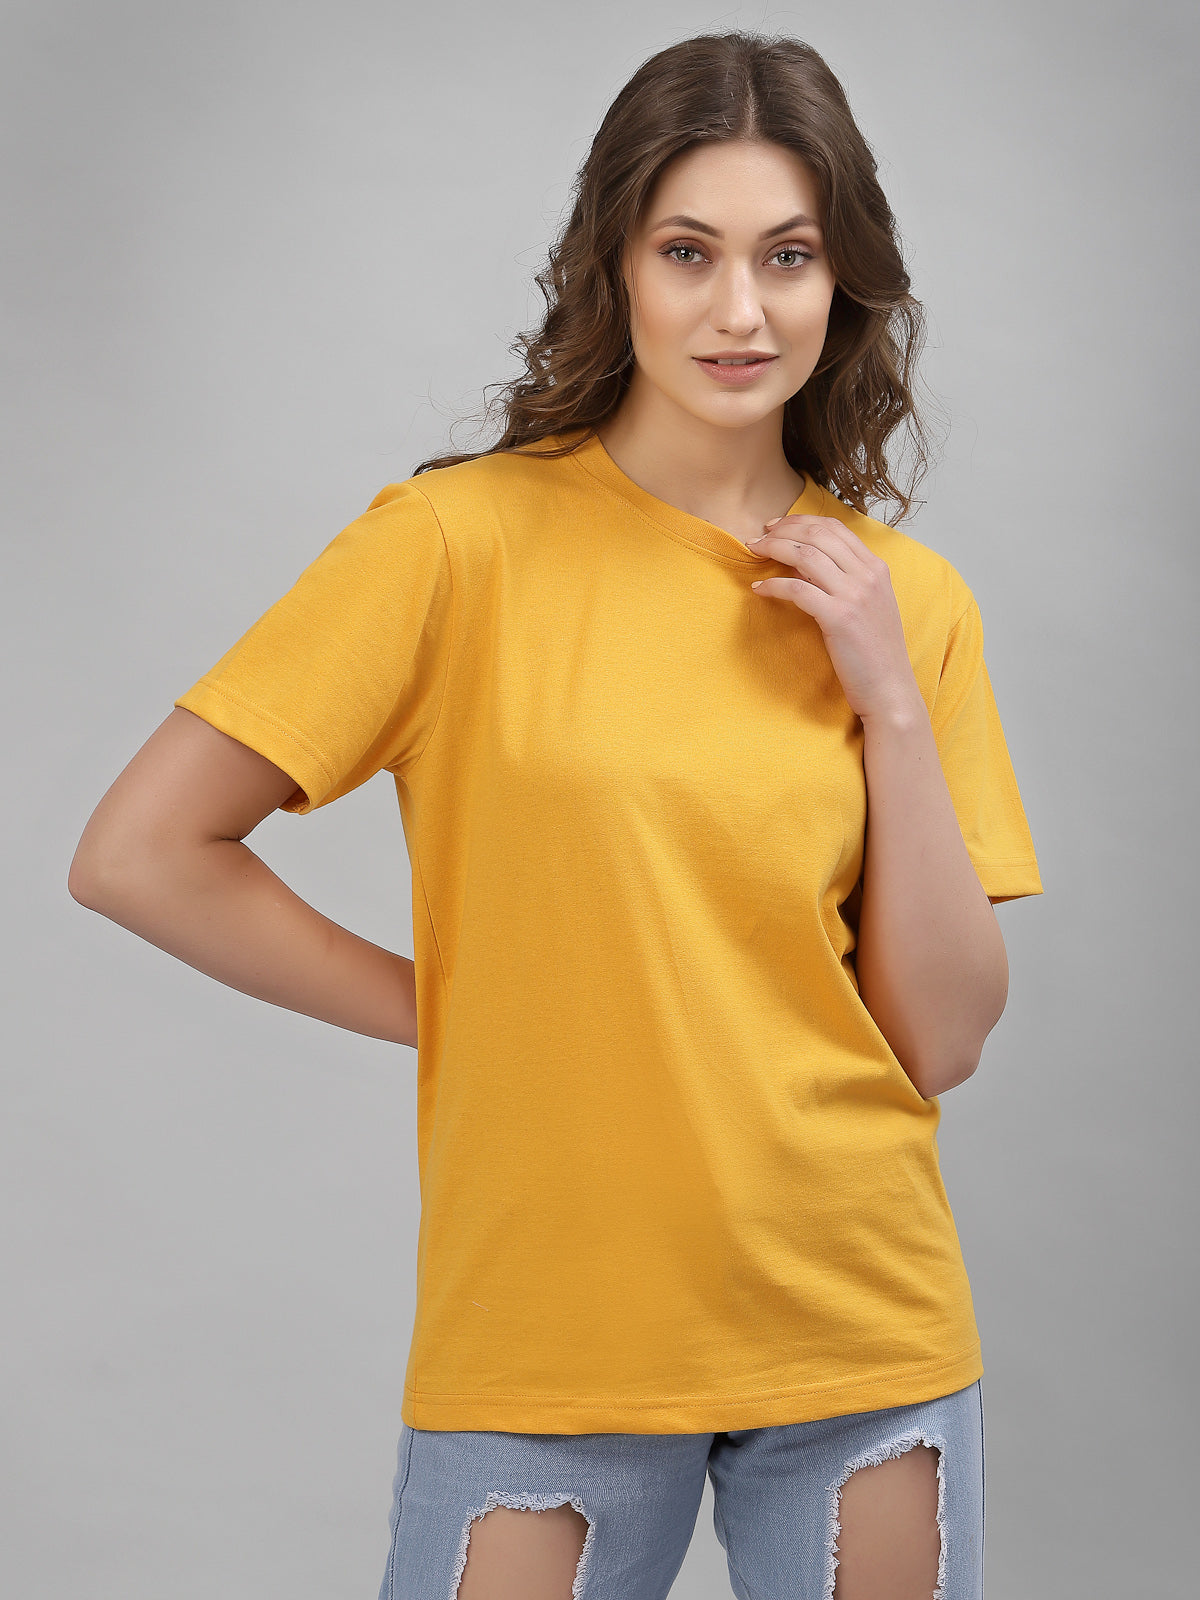 Oversized T-Shirts for Women: Embrace Comfort and Style